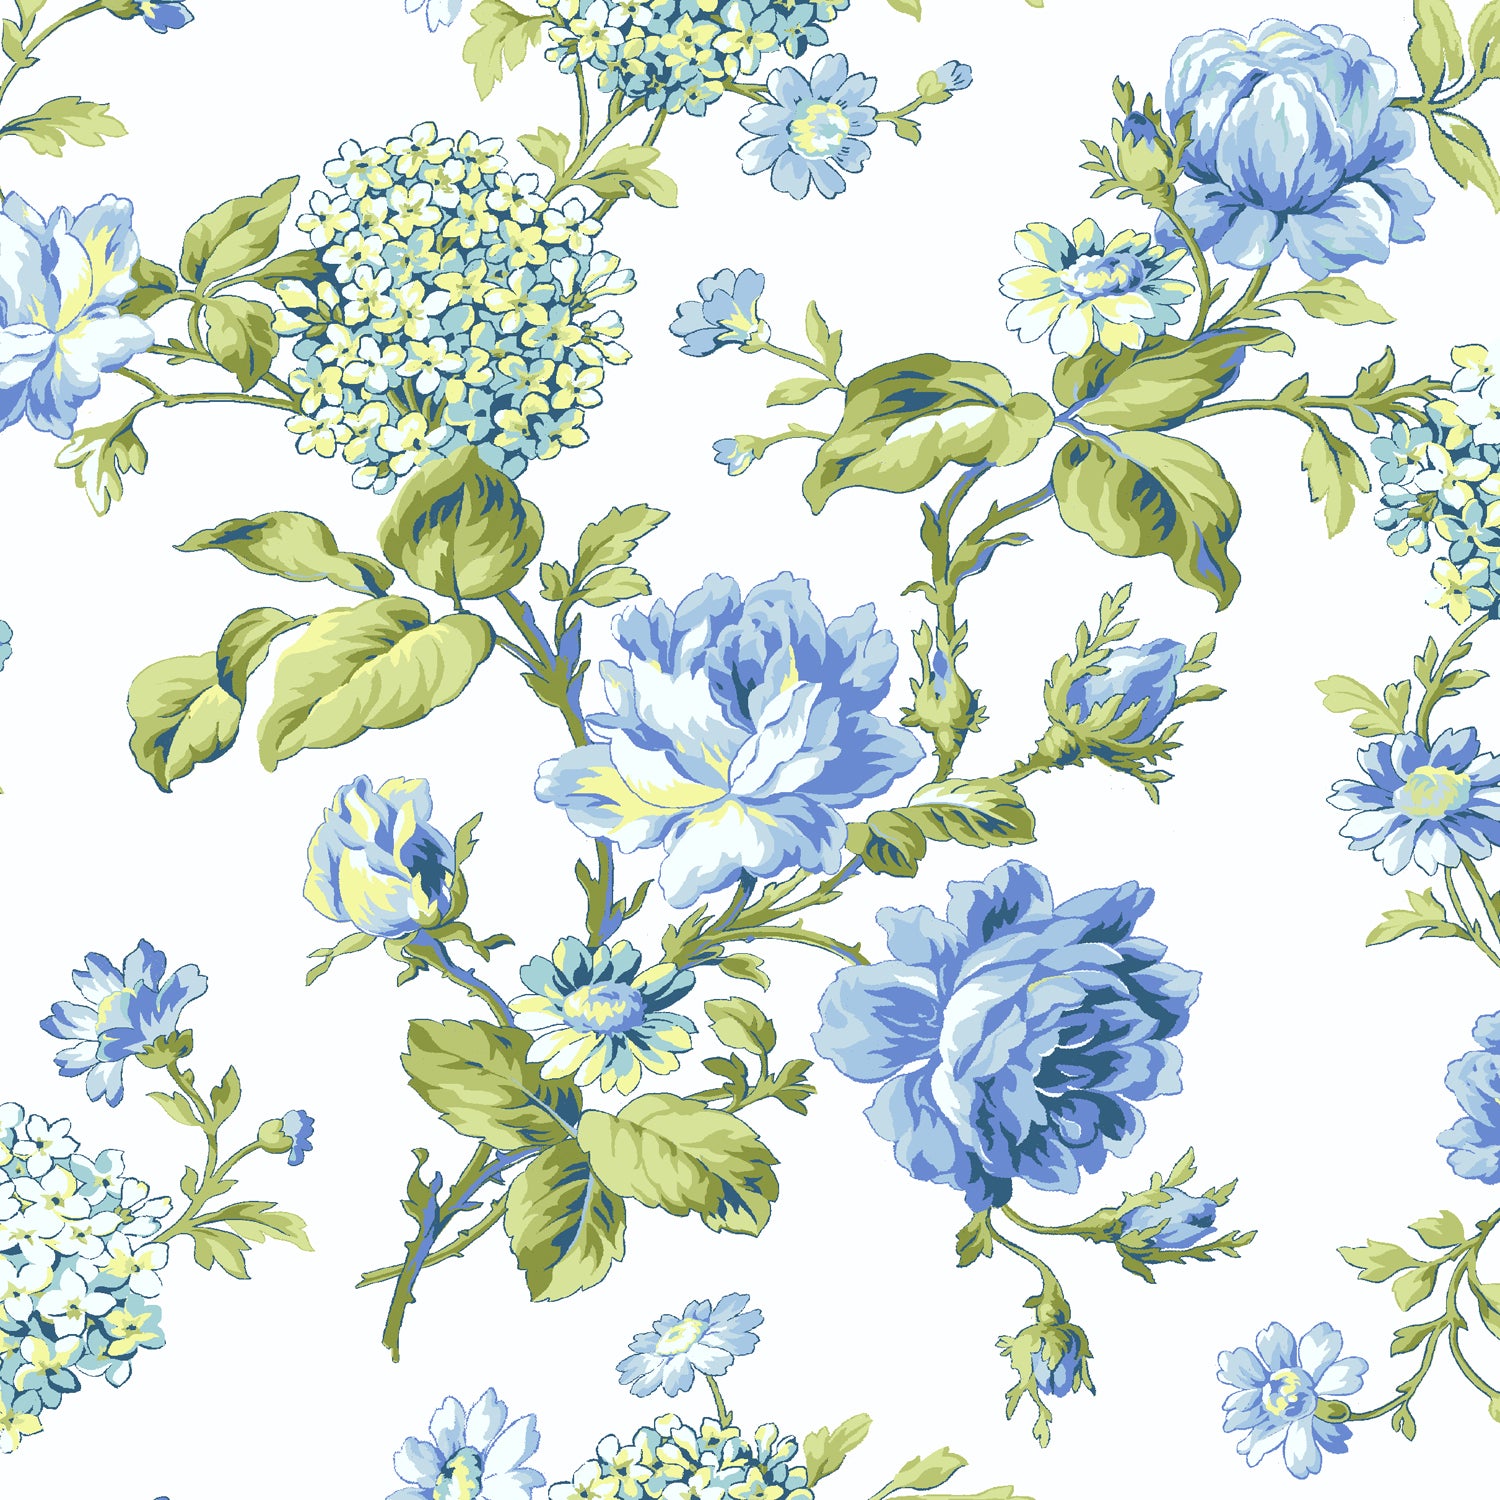 Waverly Inspirations Cotton 44" Hydran Provence Blue Color Sewing Fabric by the Yard